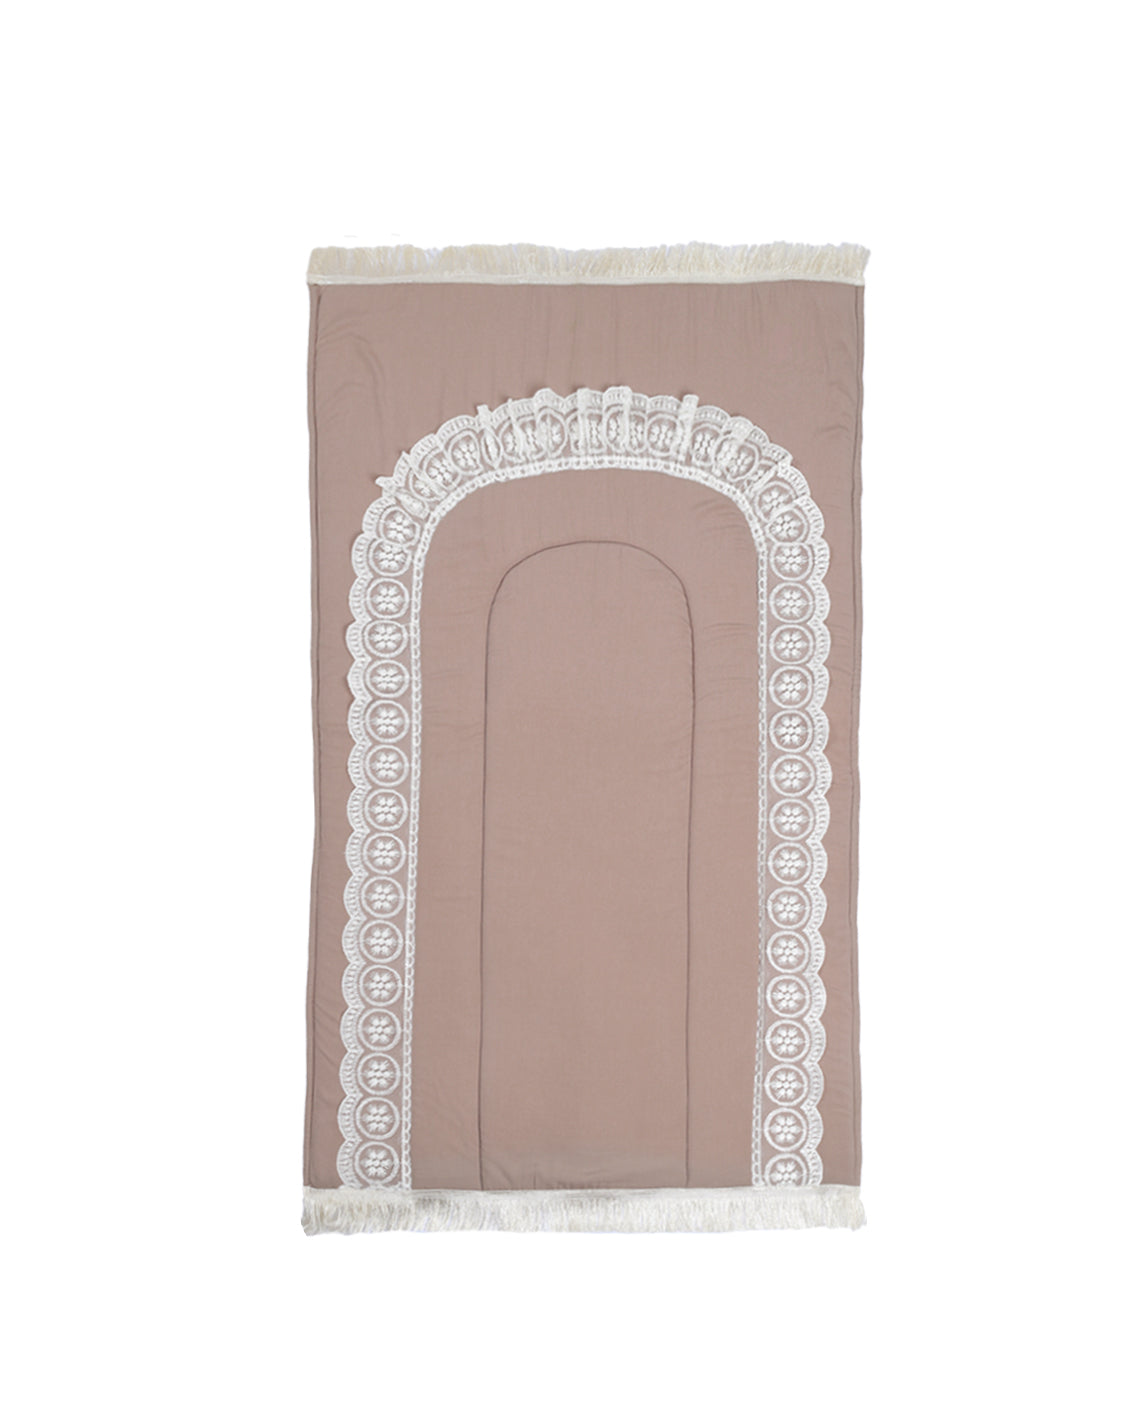 Nude Beige Lace Embroidered Prayer Mat